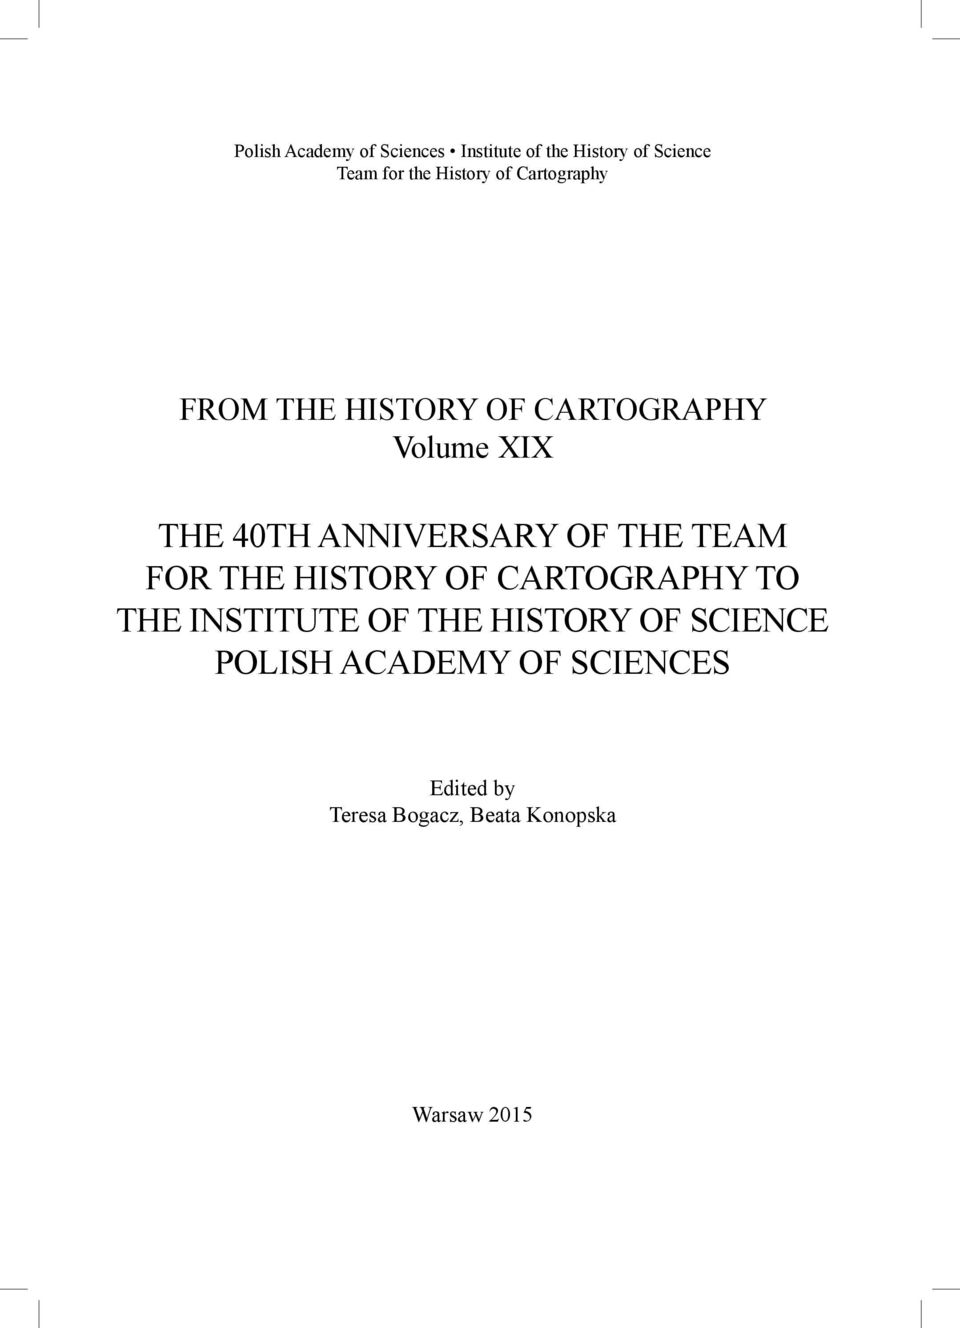 40TH ANNIVERSARY OF THE TEAM FOR THE HISTORY OF CARTOGRAPHY TO THE